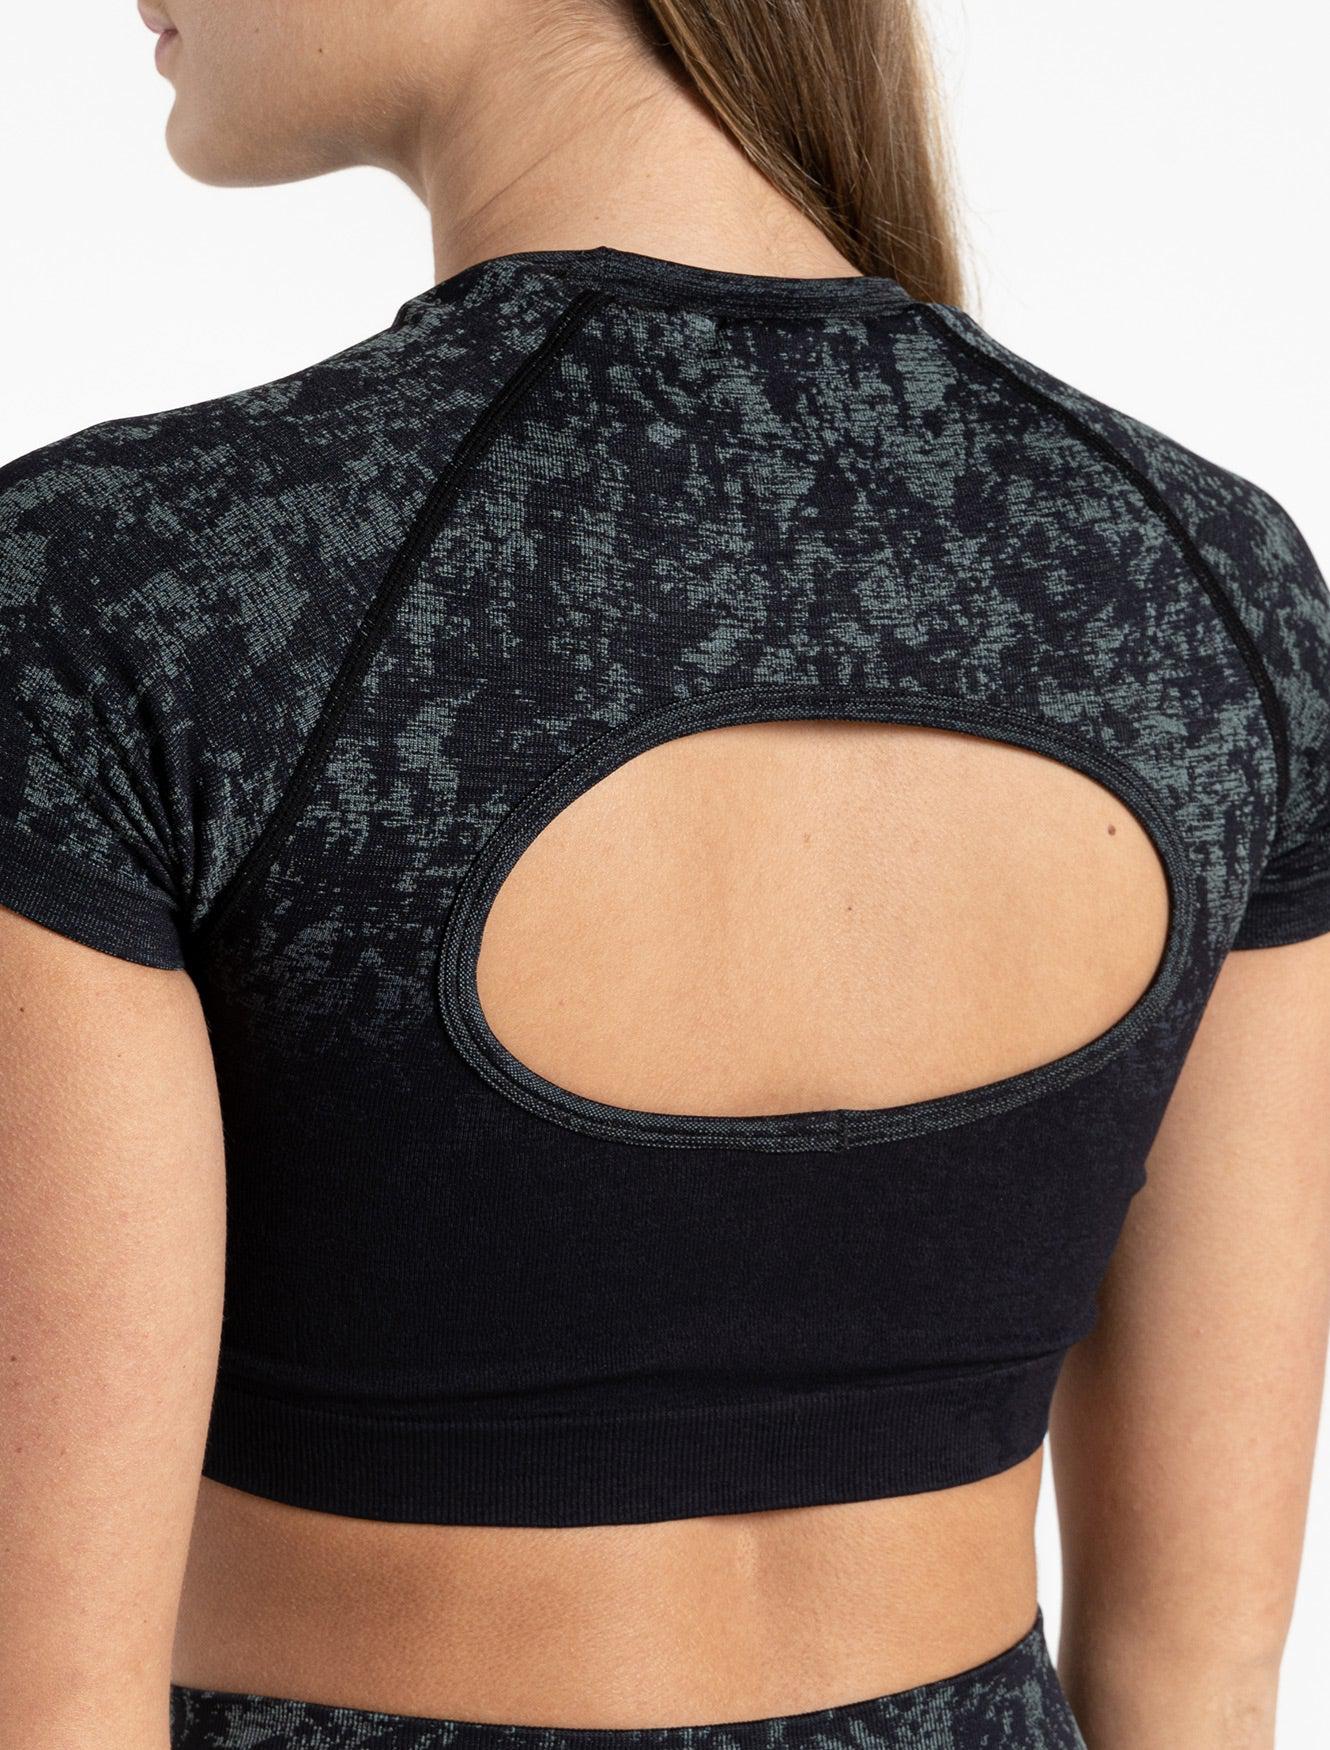 Cosmic Seamless Crop Top / Black Ombre Pursue Fitness 4